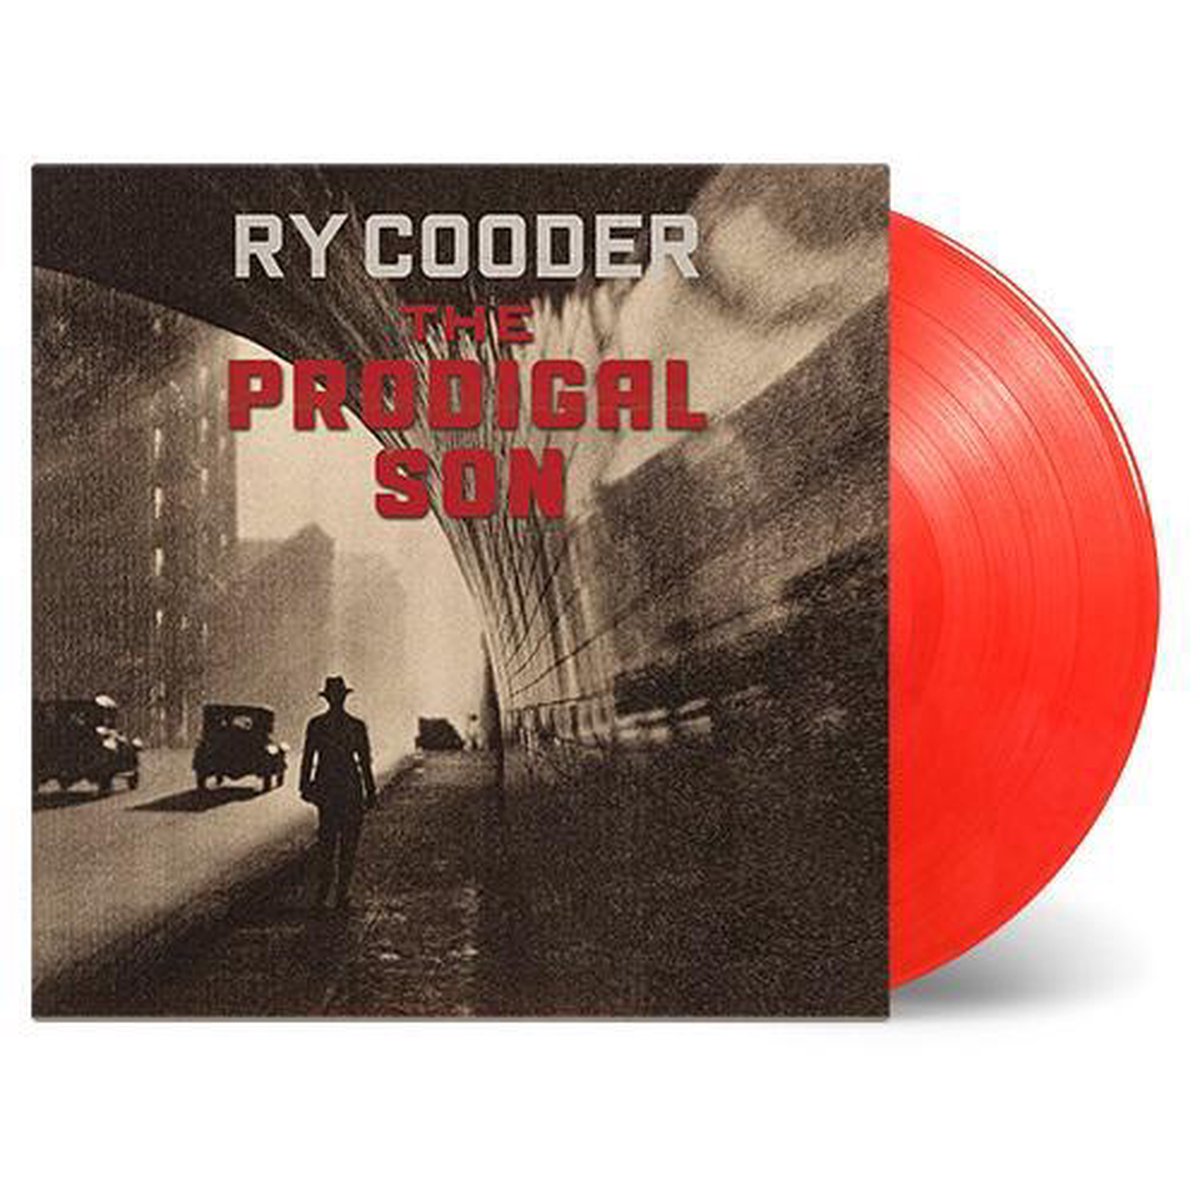 The Prodigal Son (Red Vinyl) - Ry Cooder